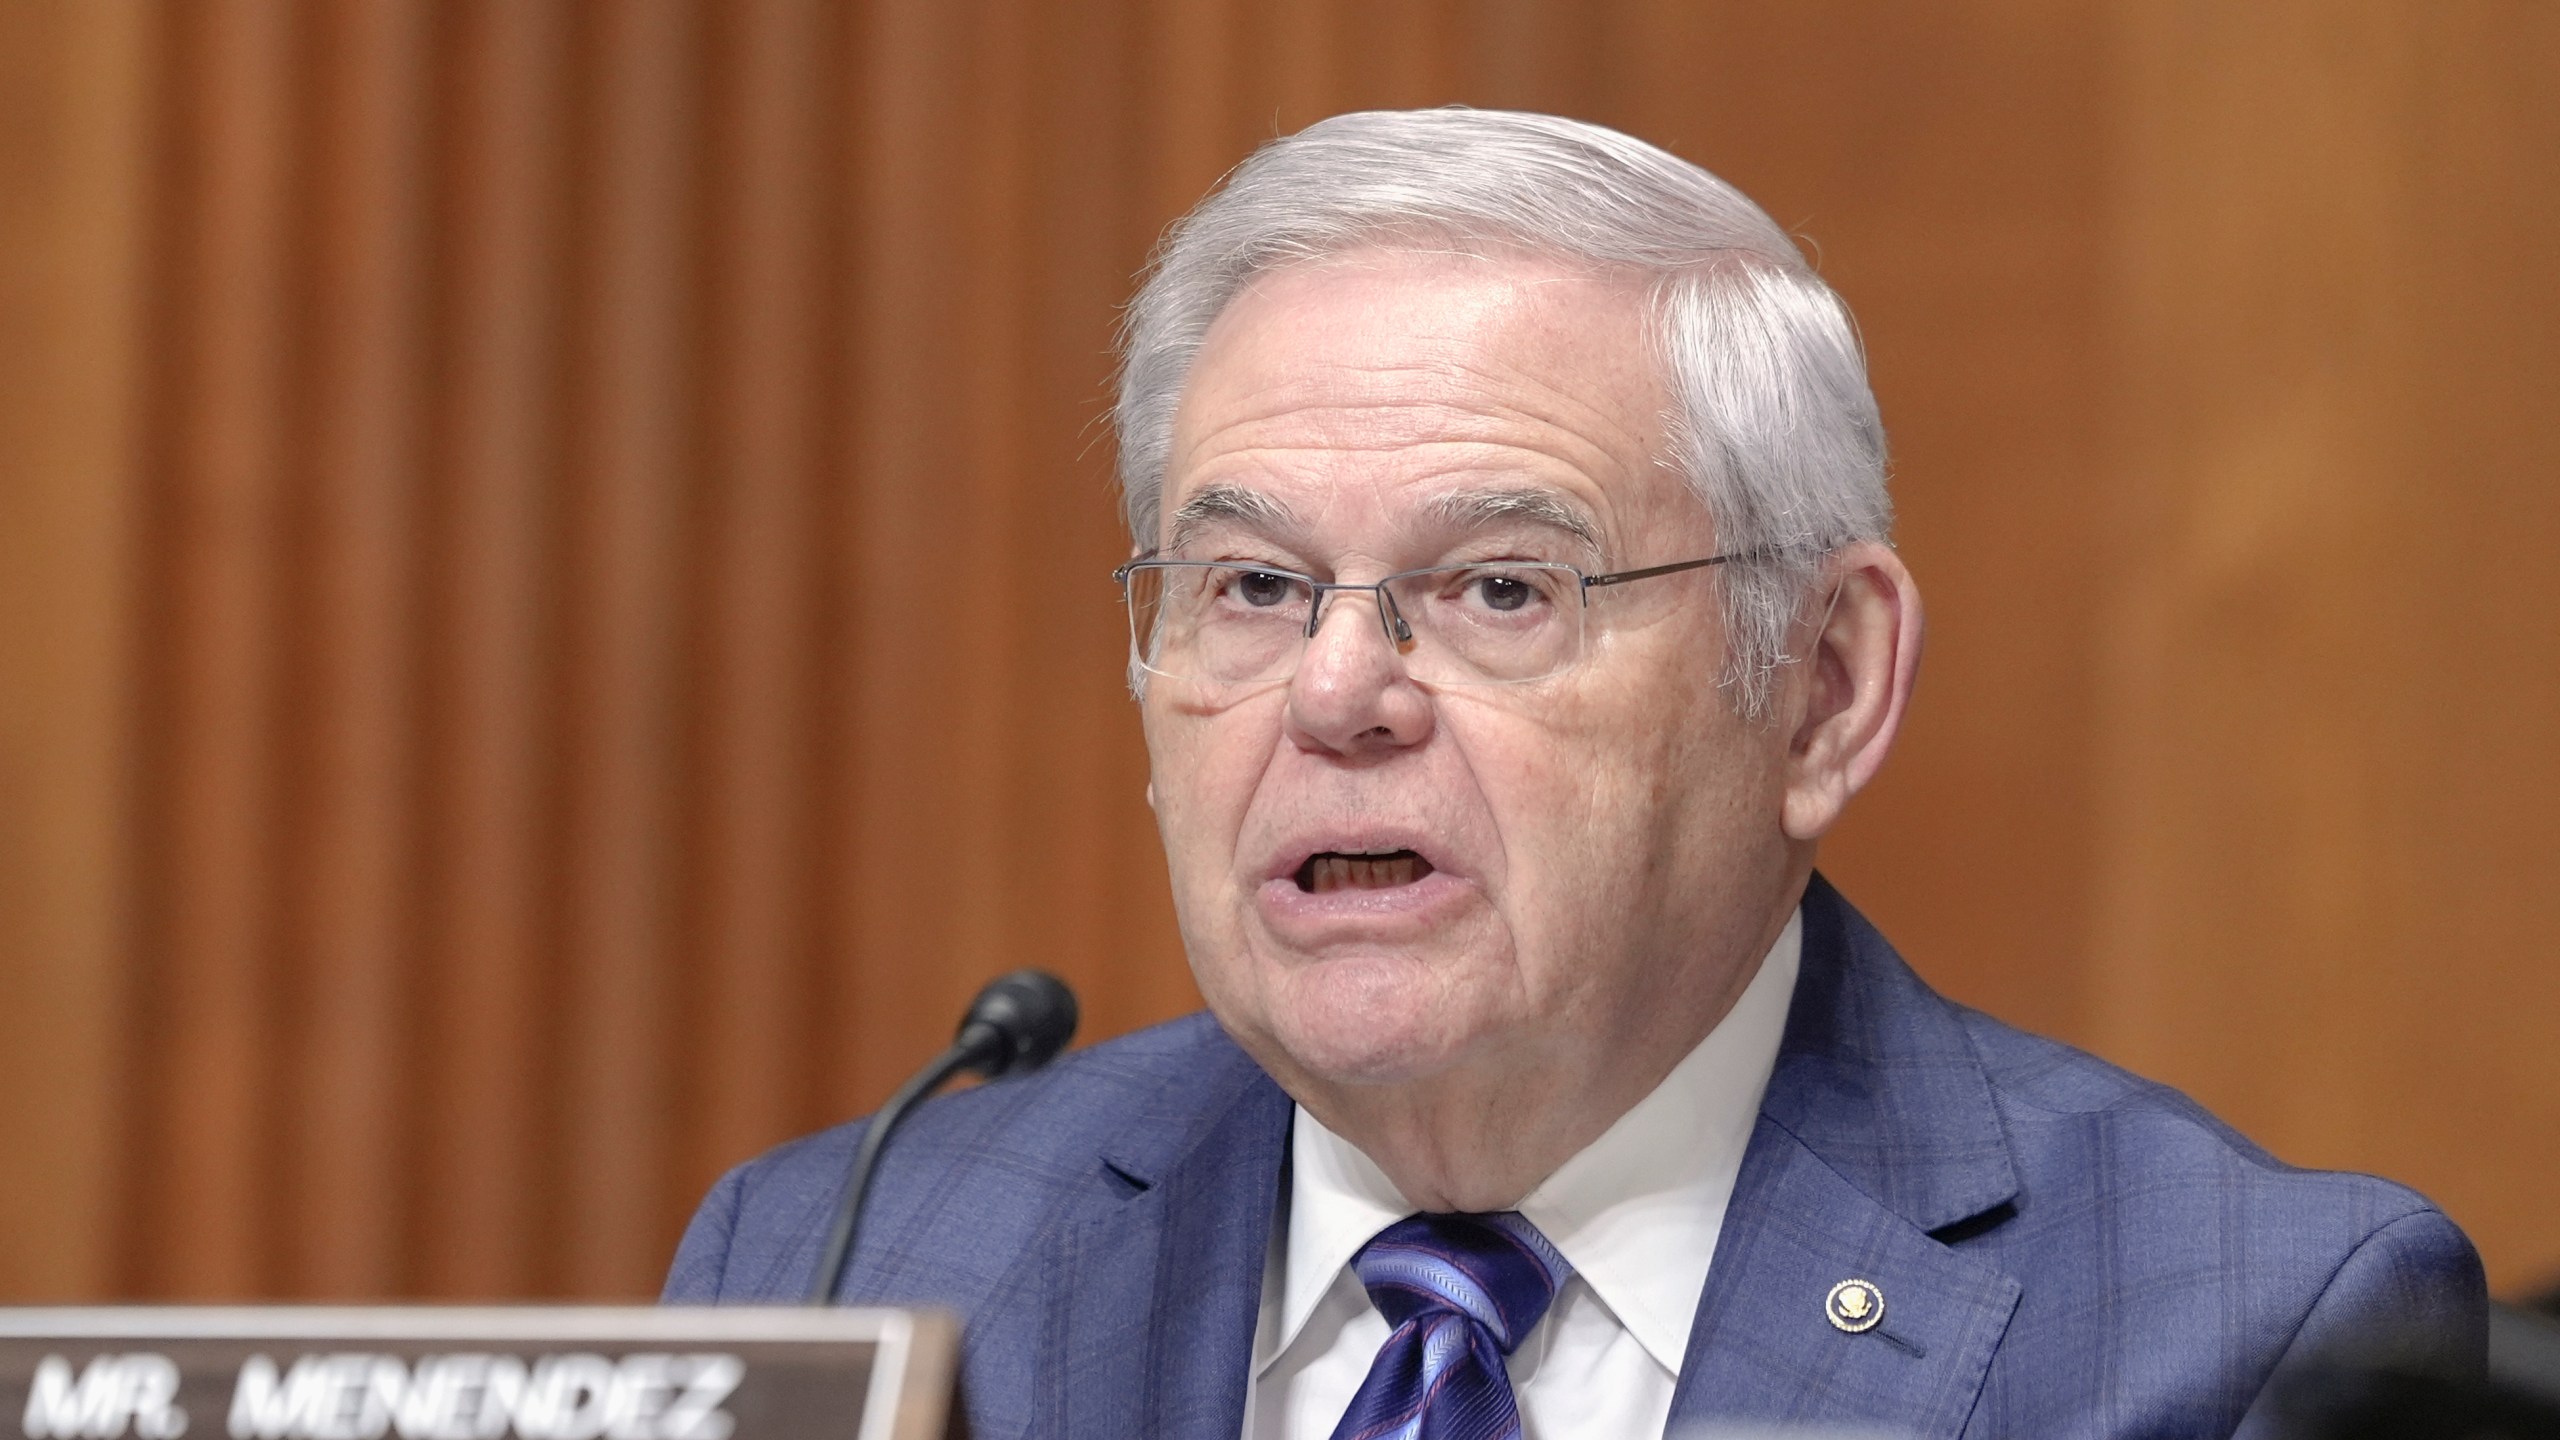 Sen. Bob Menendez, D-N.J., asks a question during a Senate Finance Committee hearing to examine the President's proposed budget request for fiscal year 2025 for the Department of Health and Human Services on Capitol Hill Thursday, March 14, 2024, in Washington. (AP Photo/Mariam Zuhaib)